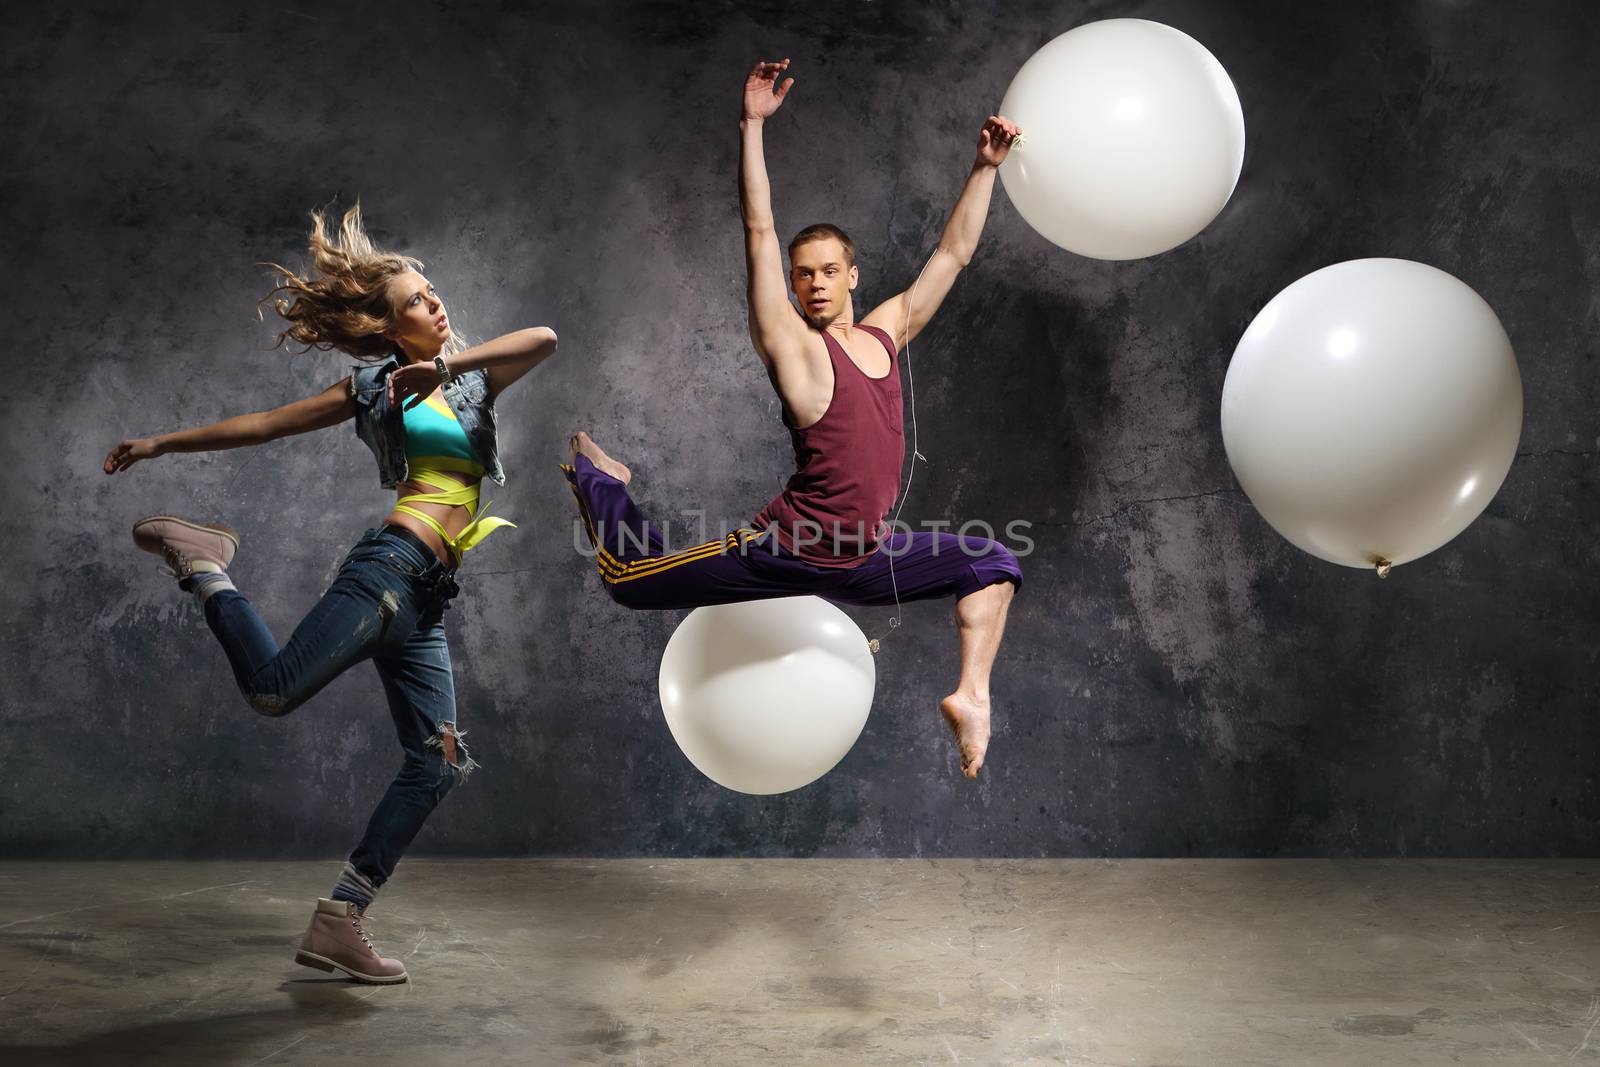 A pair of dancers in a jump in the arrangement with the big balloons